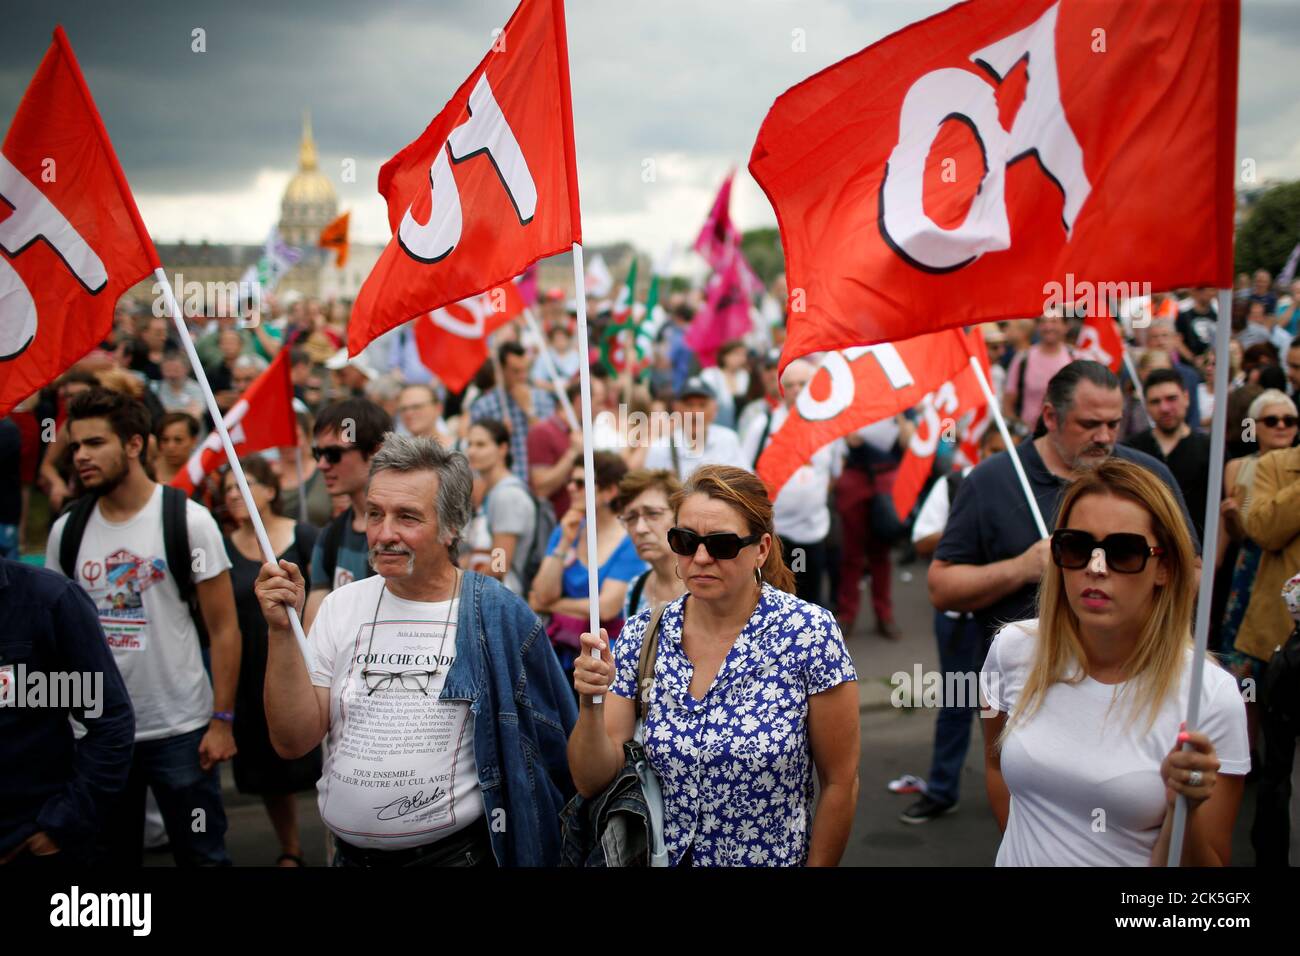 People attend a French unions gathering to protest work precariousness as France's new parliament will sit for the first time at the Invalides square in Paris, France June 27, 2017. REUTERS/Gonzalo Fuentes Stock Photo